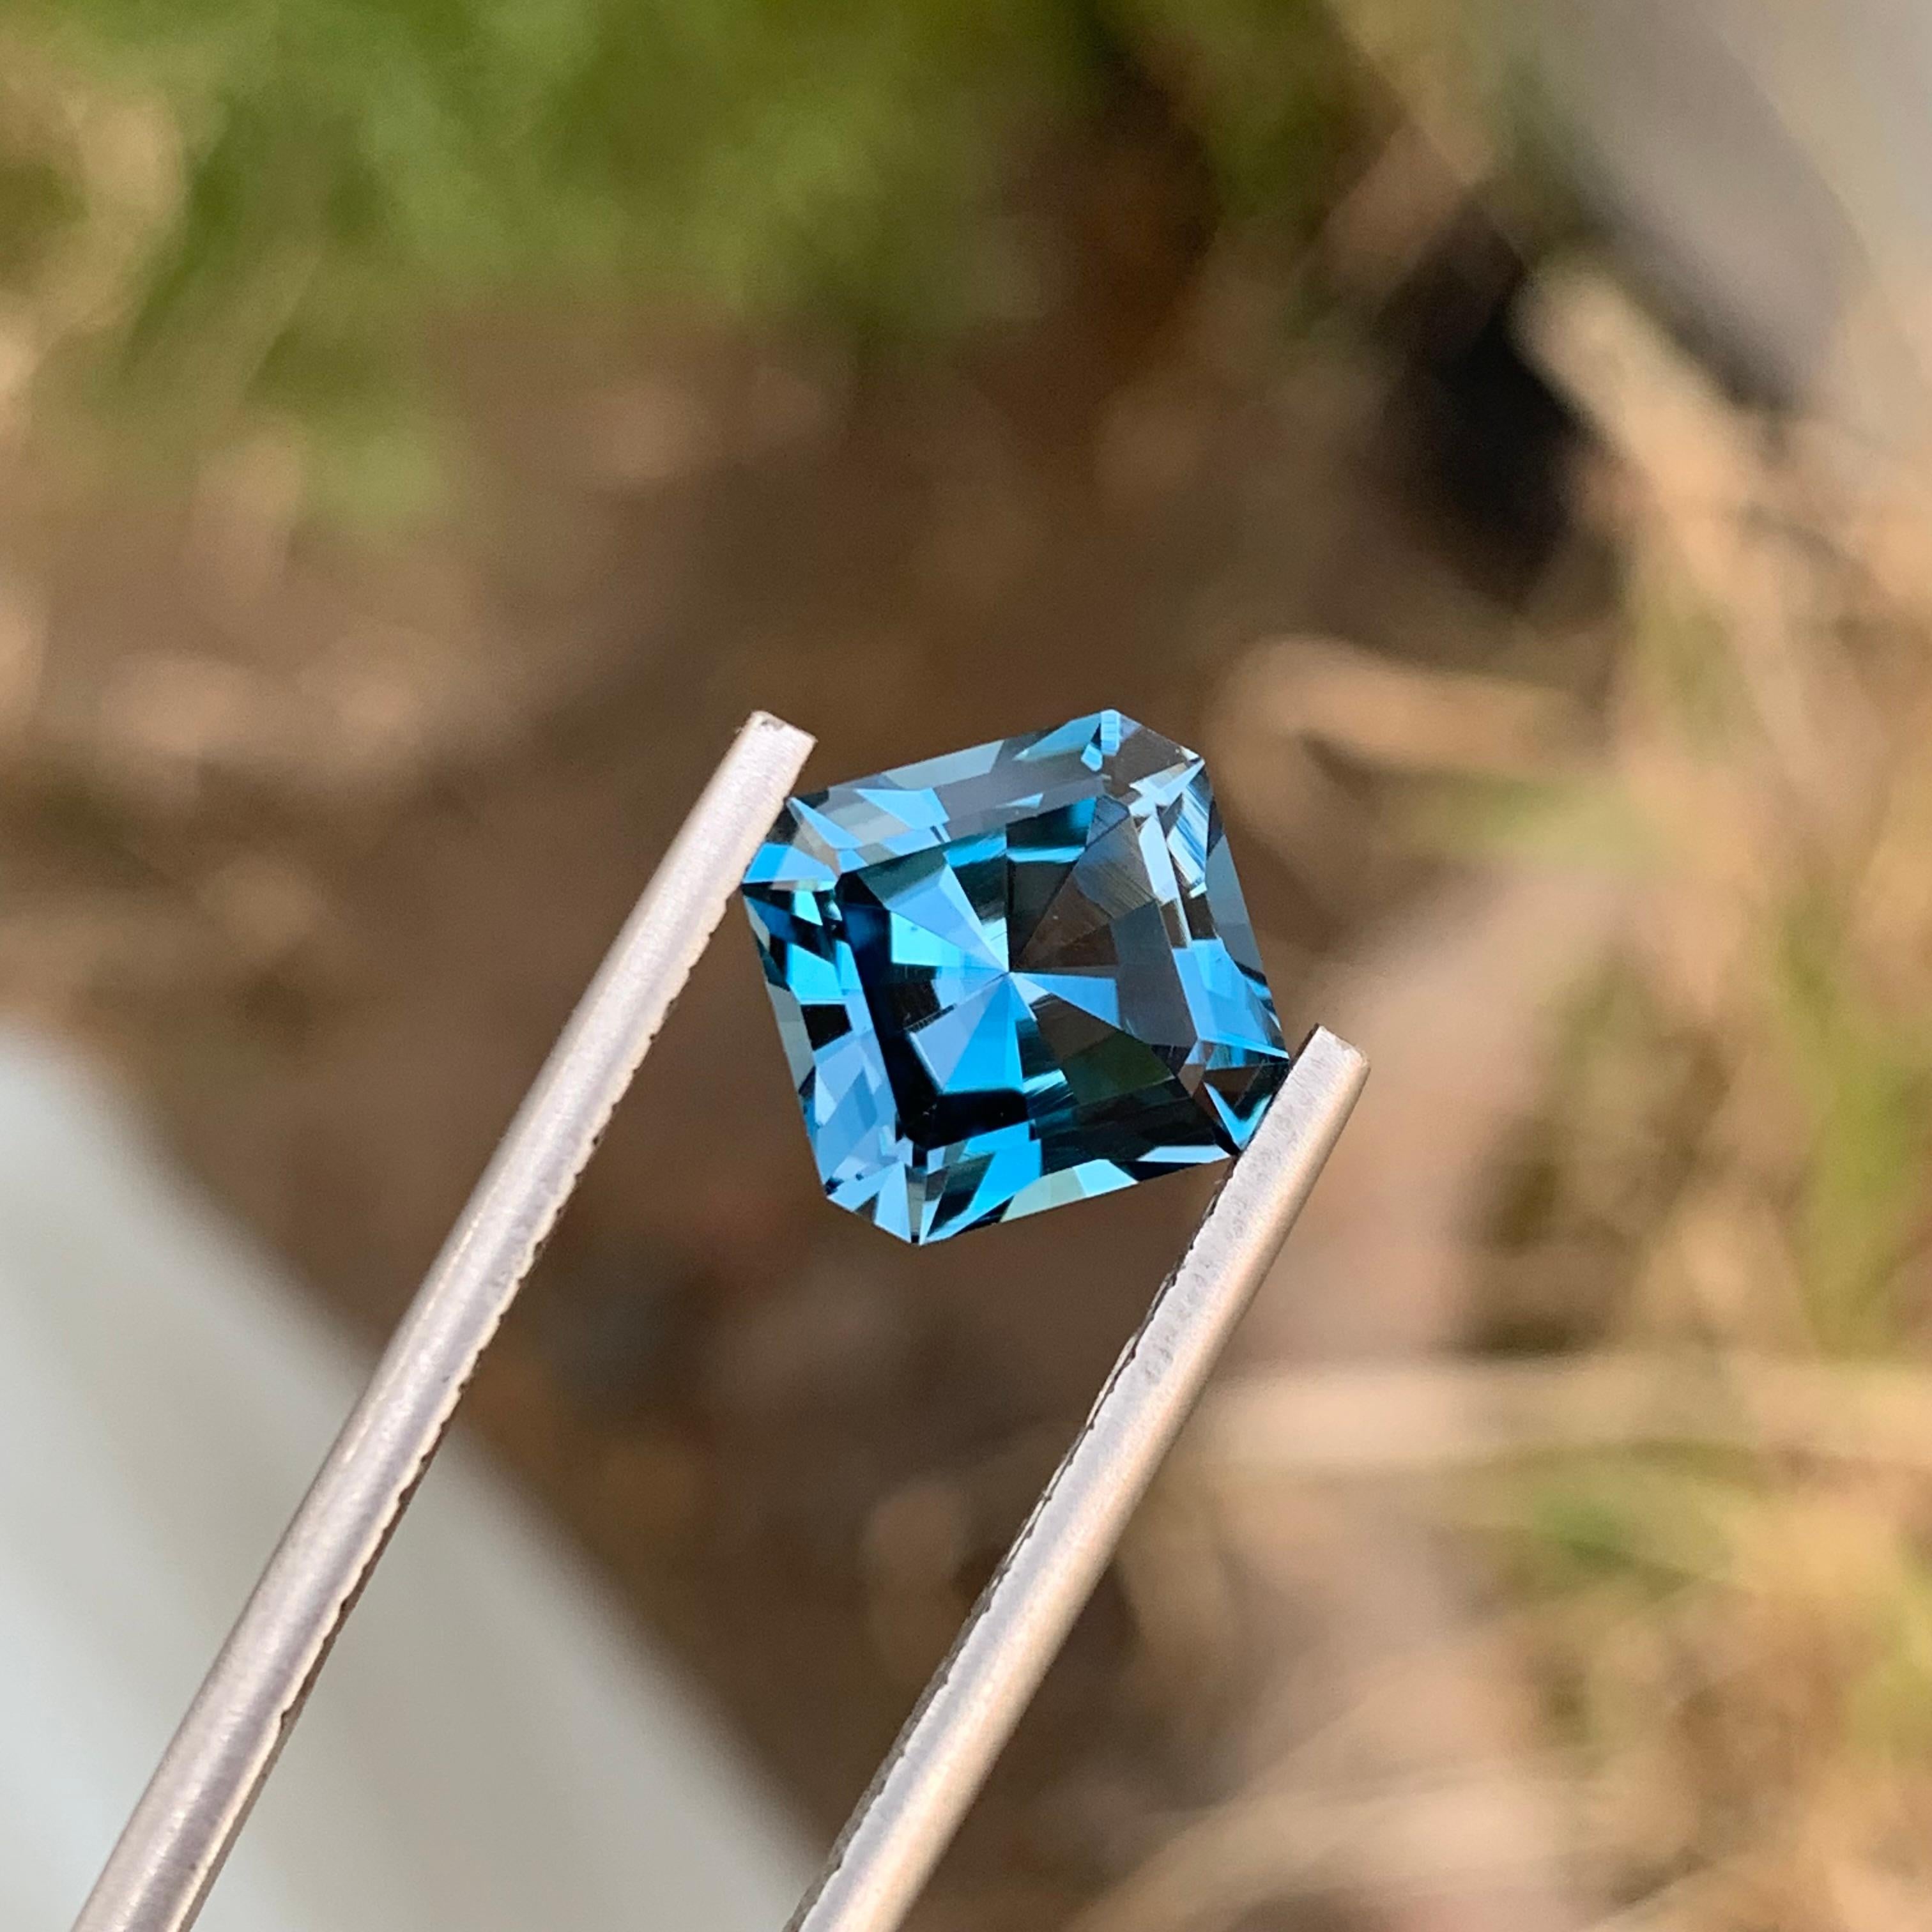 Loose London Blue Topaz
Weight: 4.15 Carats 
Dimension: 9.1x8.7x6.2 Mm
Origin: Brazil
Shape: Square Fancy
Color: Deep Blue
Certificate: On Customer Demand 
London Blue Topaz is a mesmerizing variety of topaz renowned for its deep and enchanting blue